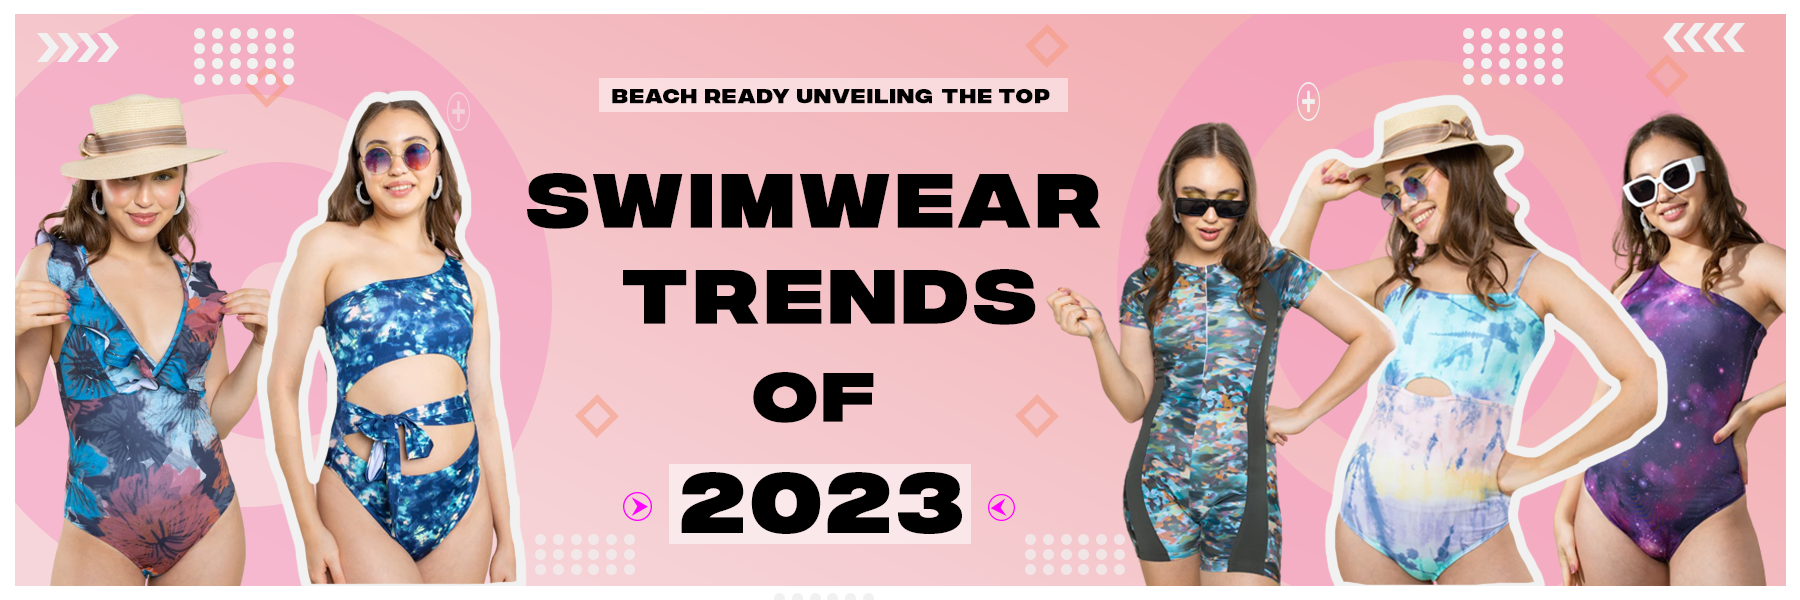 Beach Ready: Unveiling the Top Swimwear Trends of 2023